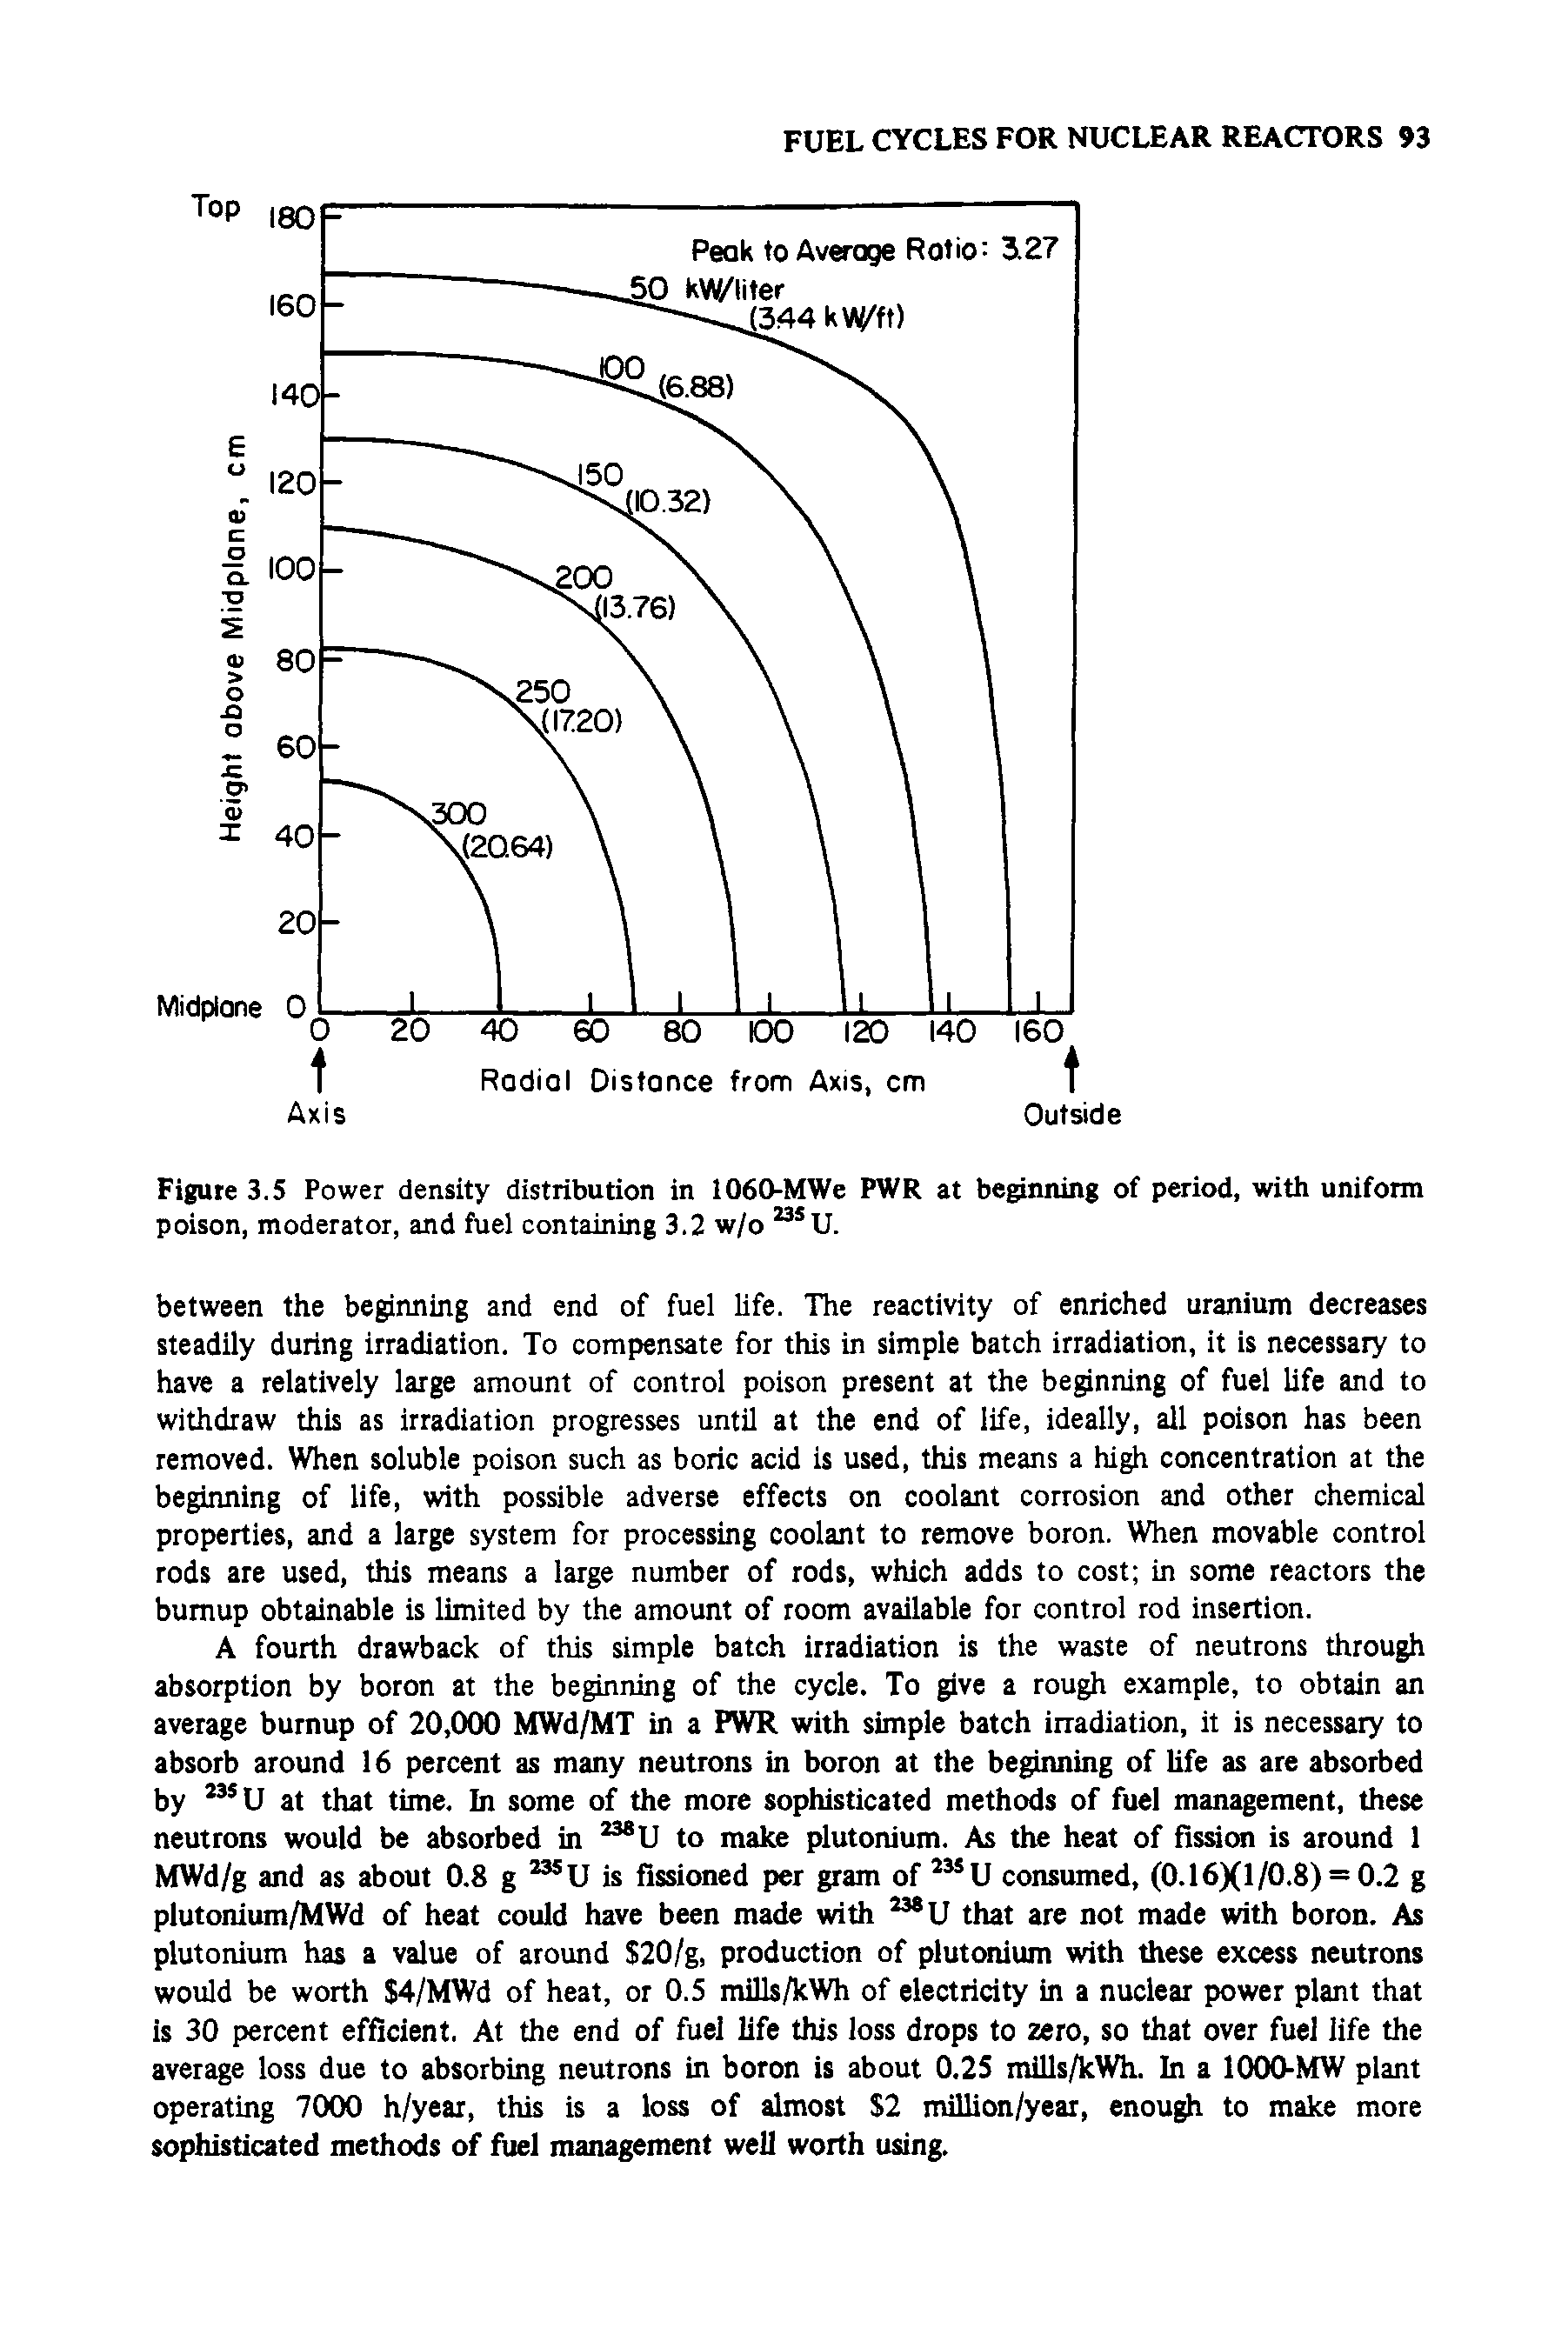 Figure 3.5 Power density distribution in 1060-MWe PWR at beginning of period, with uniform poison, moderator, and fuel containing 3.2 w/o U.